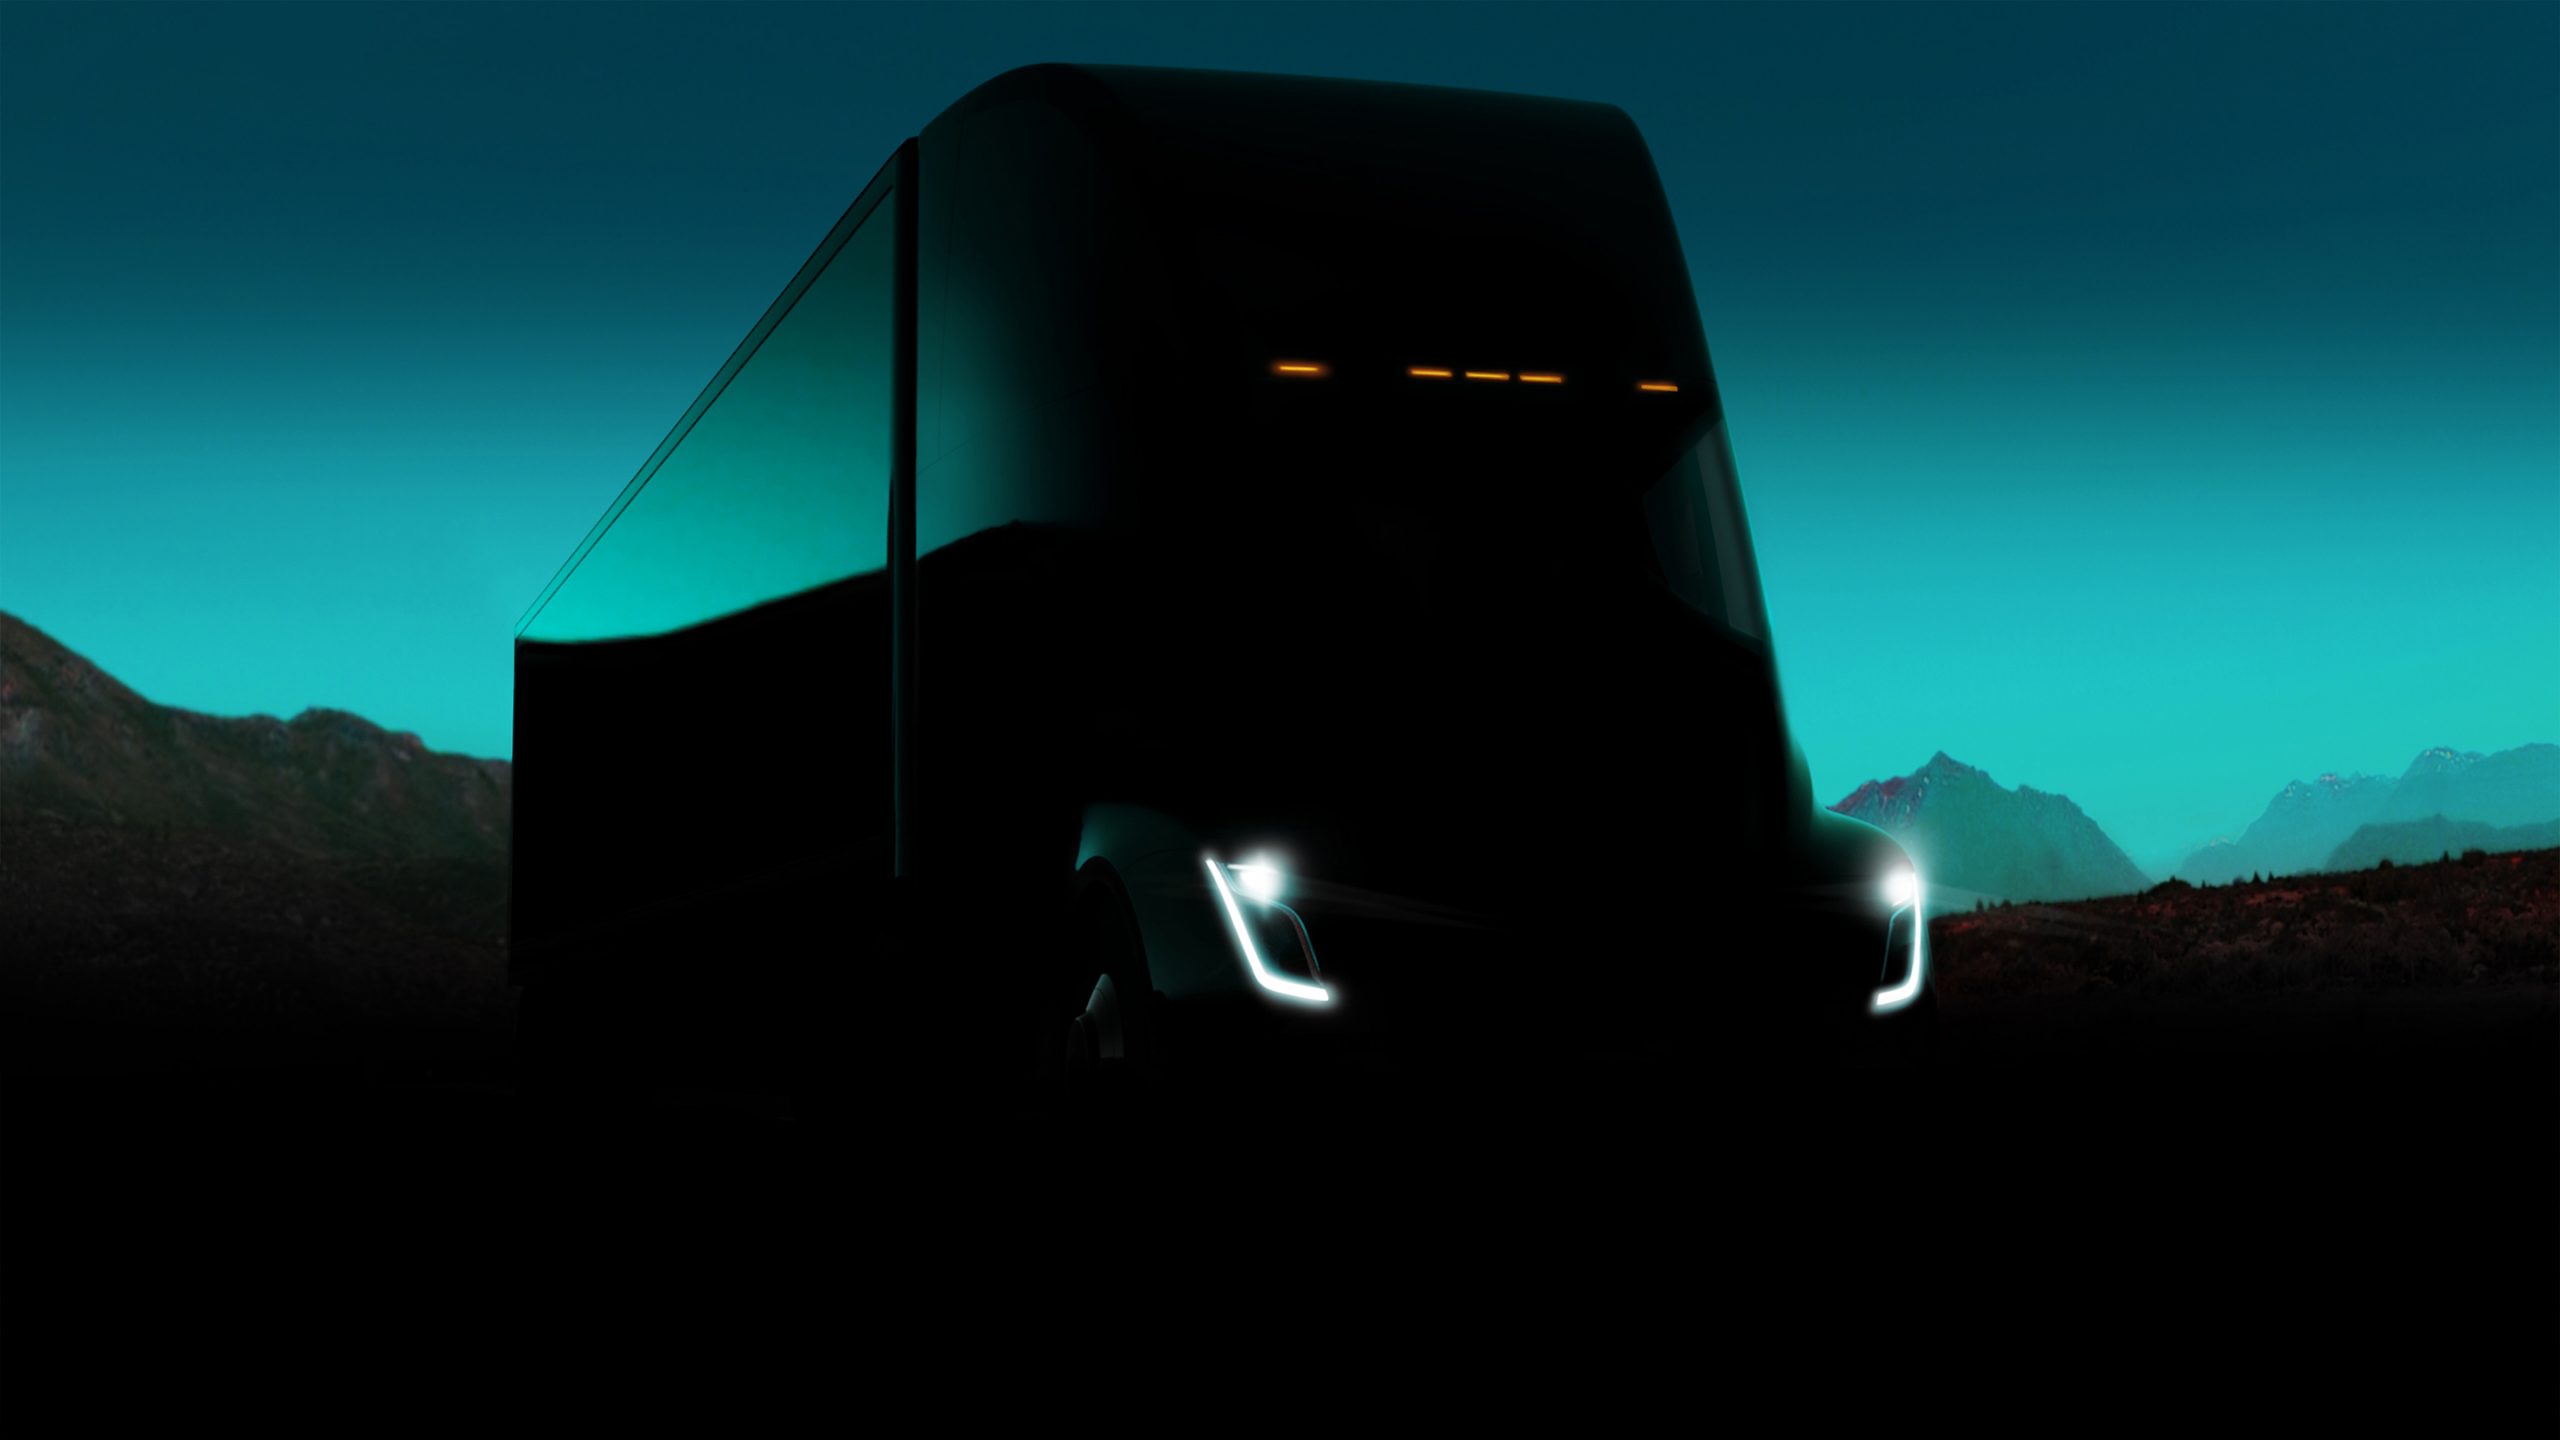 A dark figure hinting towards the debut of a tesla semi truck